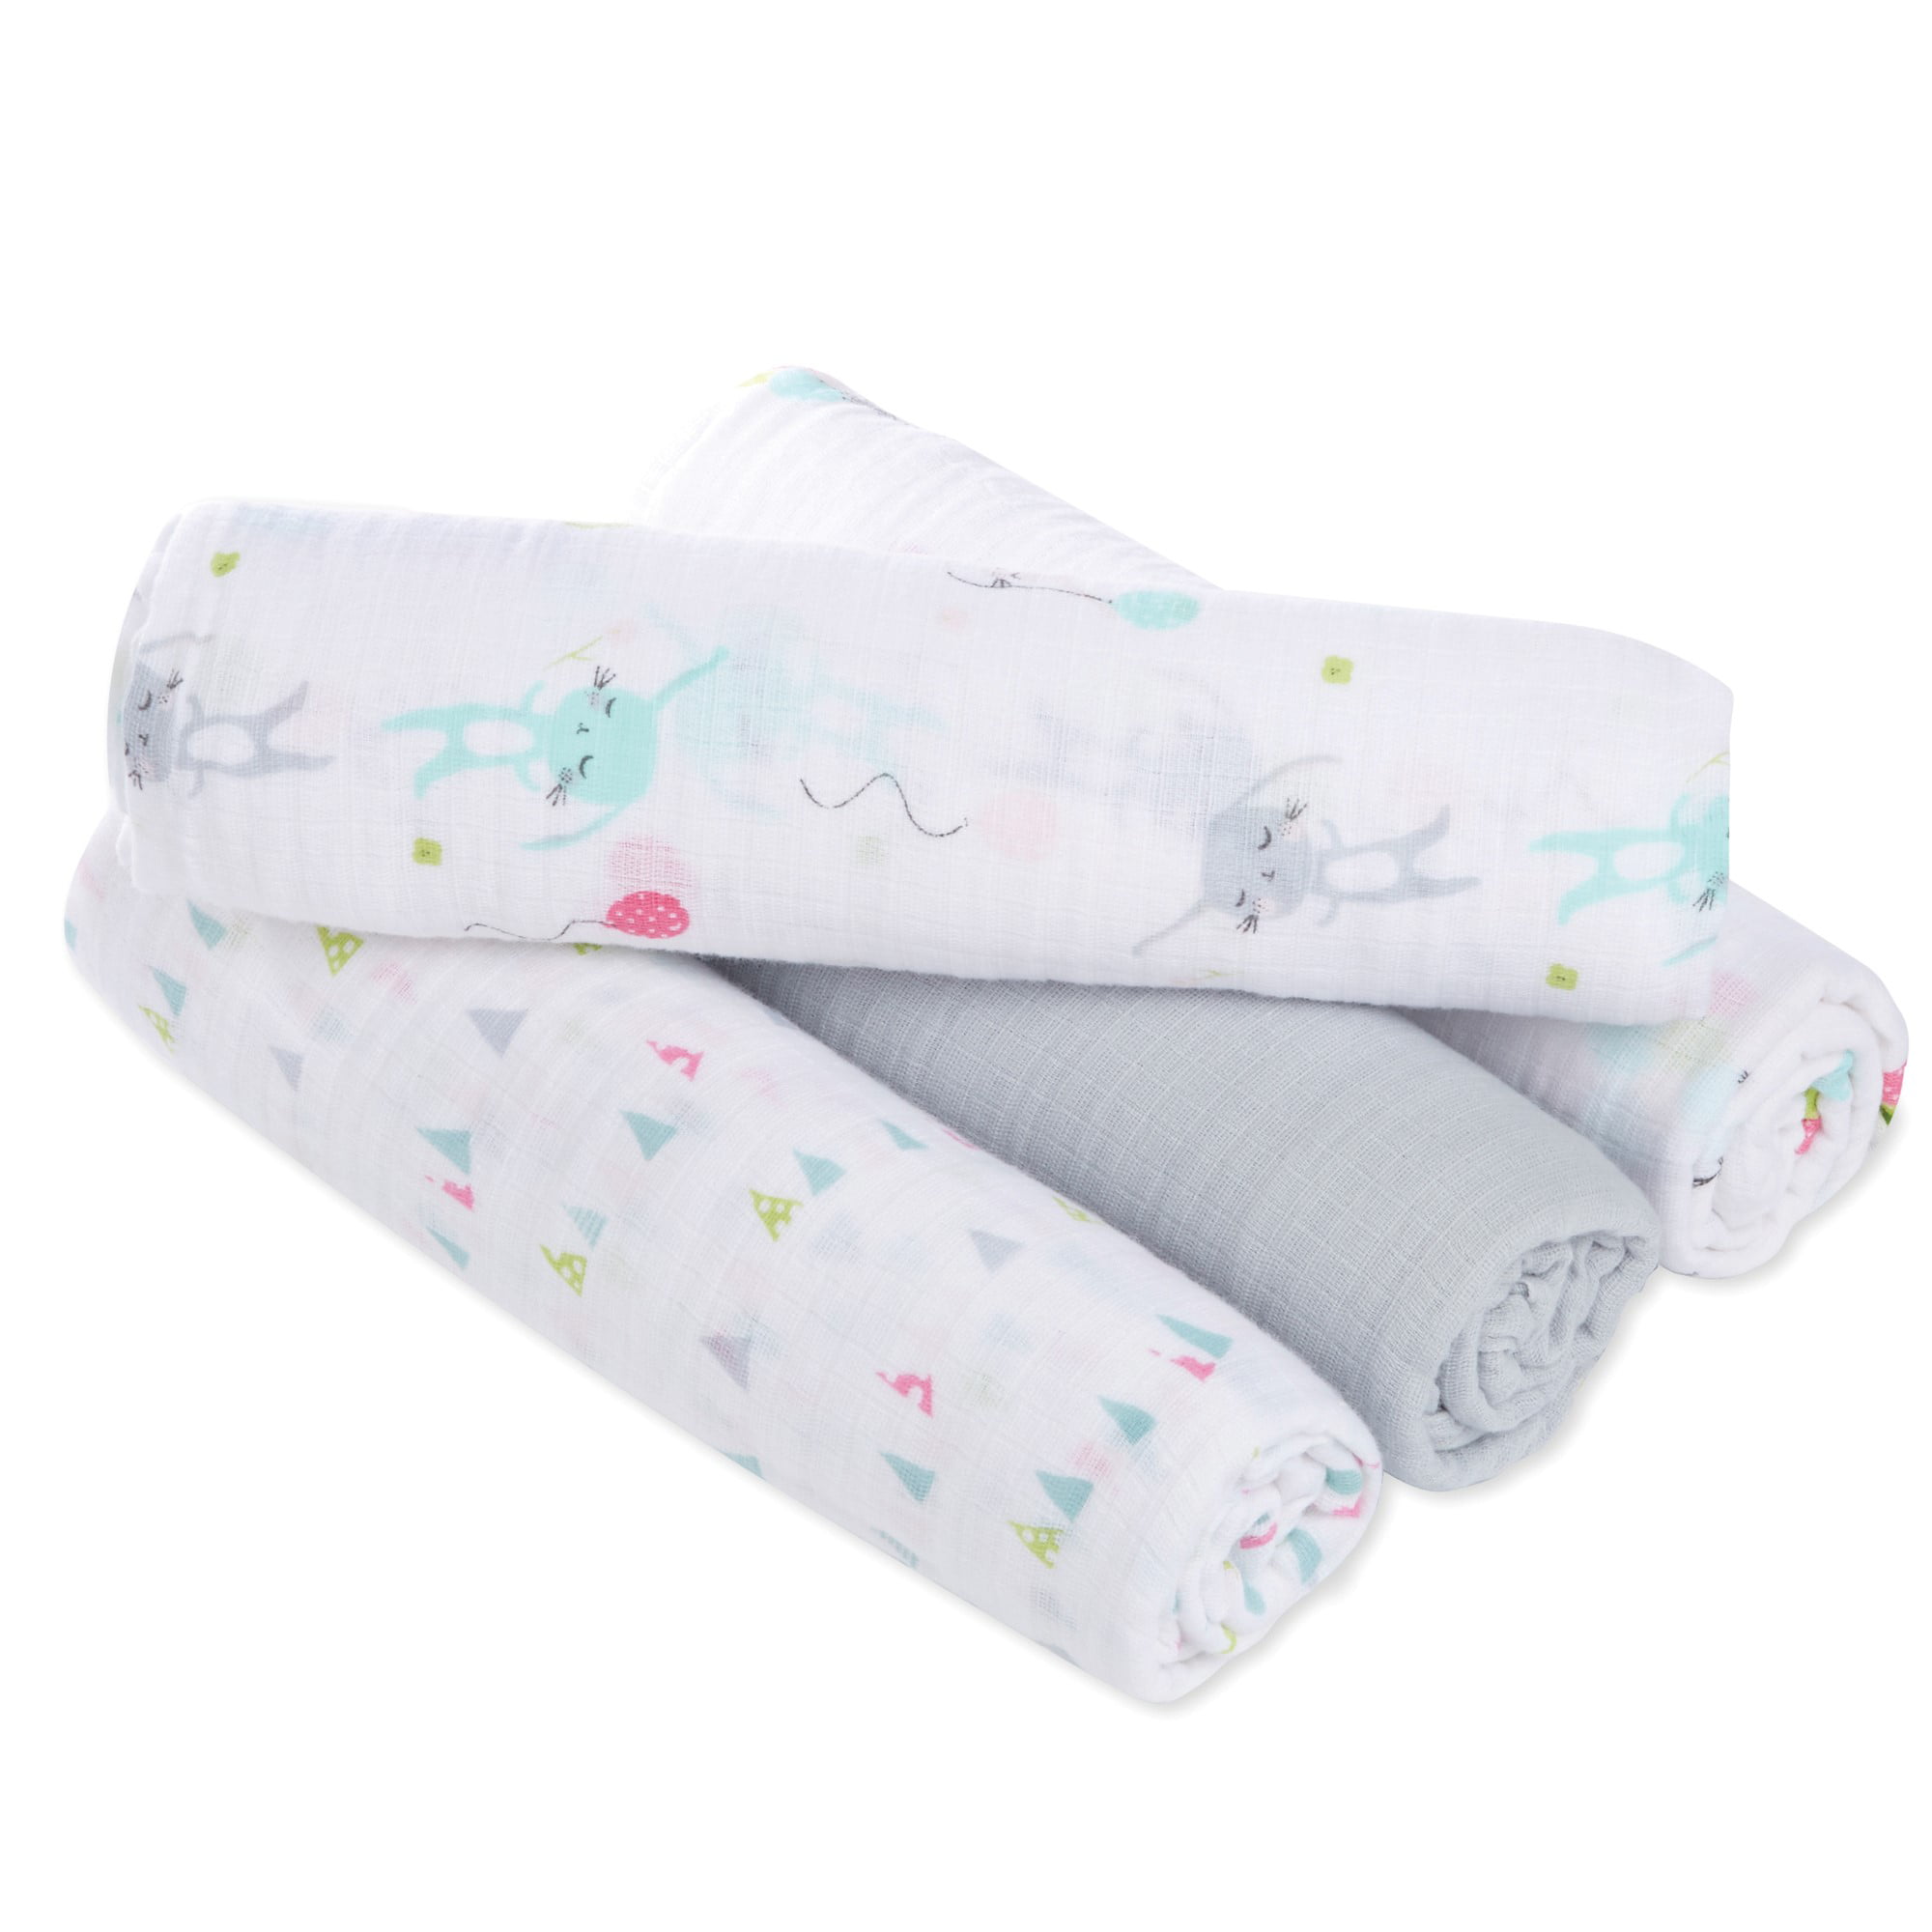 New ADEN AND ANAIS Swaddle Muslin Cotton Blanket Fox Zigzag baby 